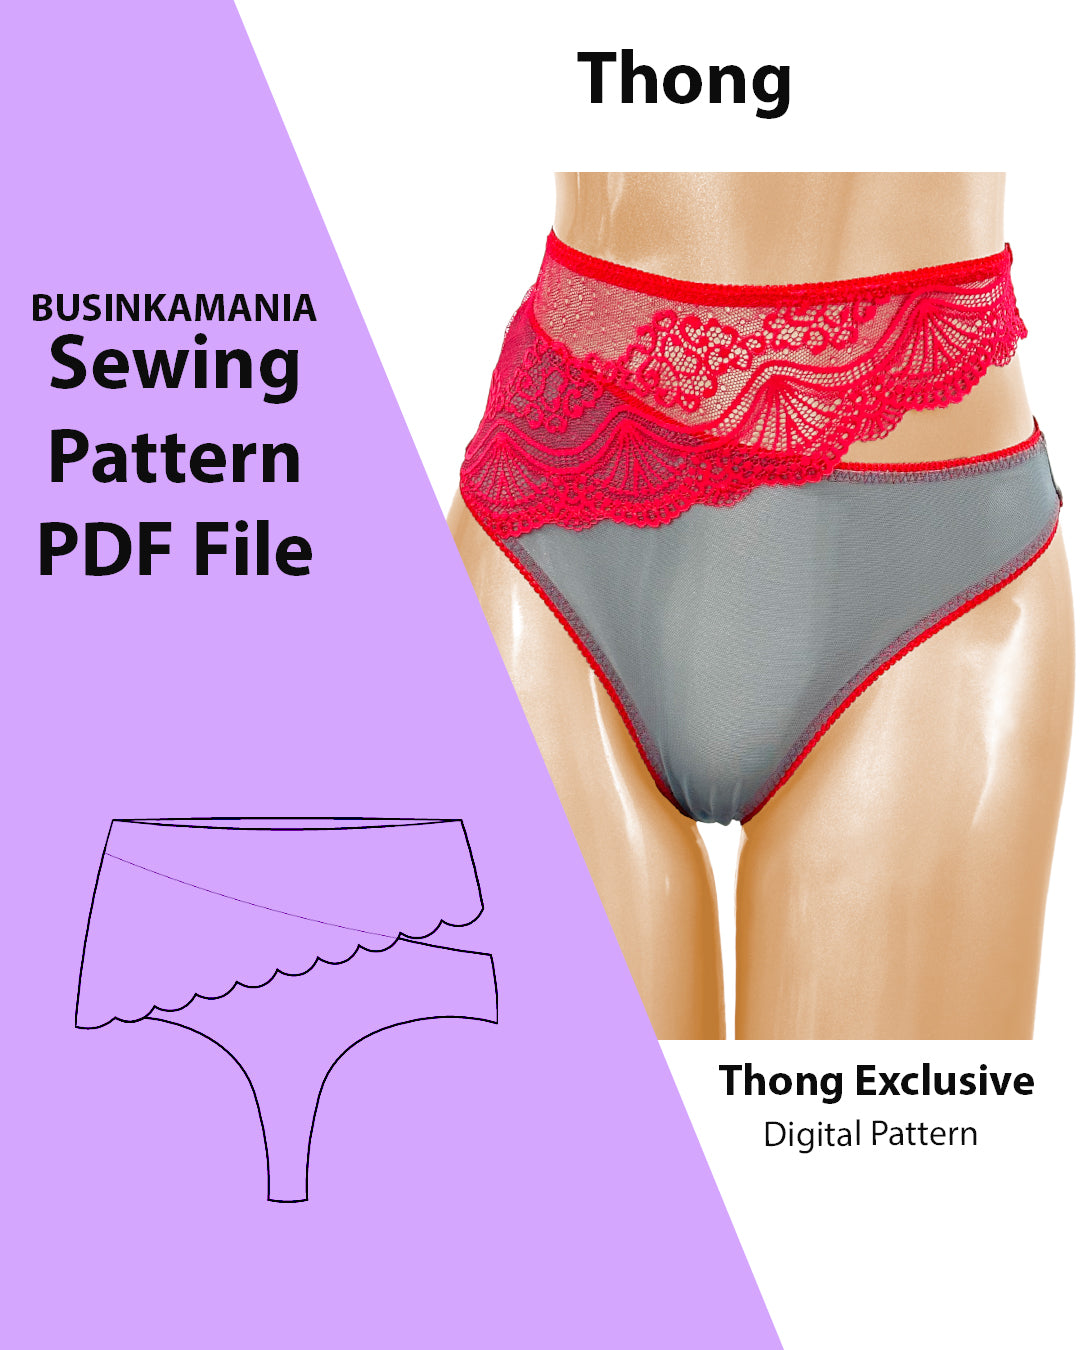 Thong Exclusive Sewing Pattern